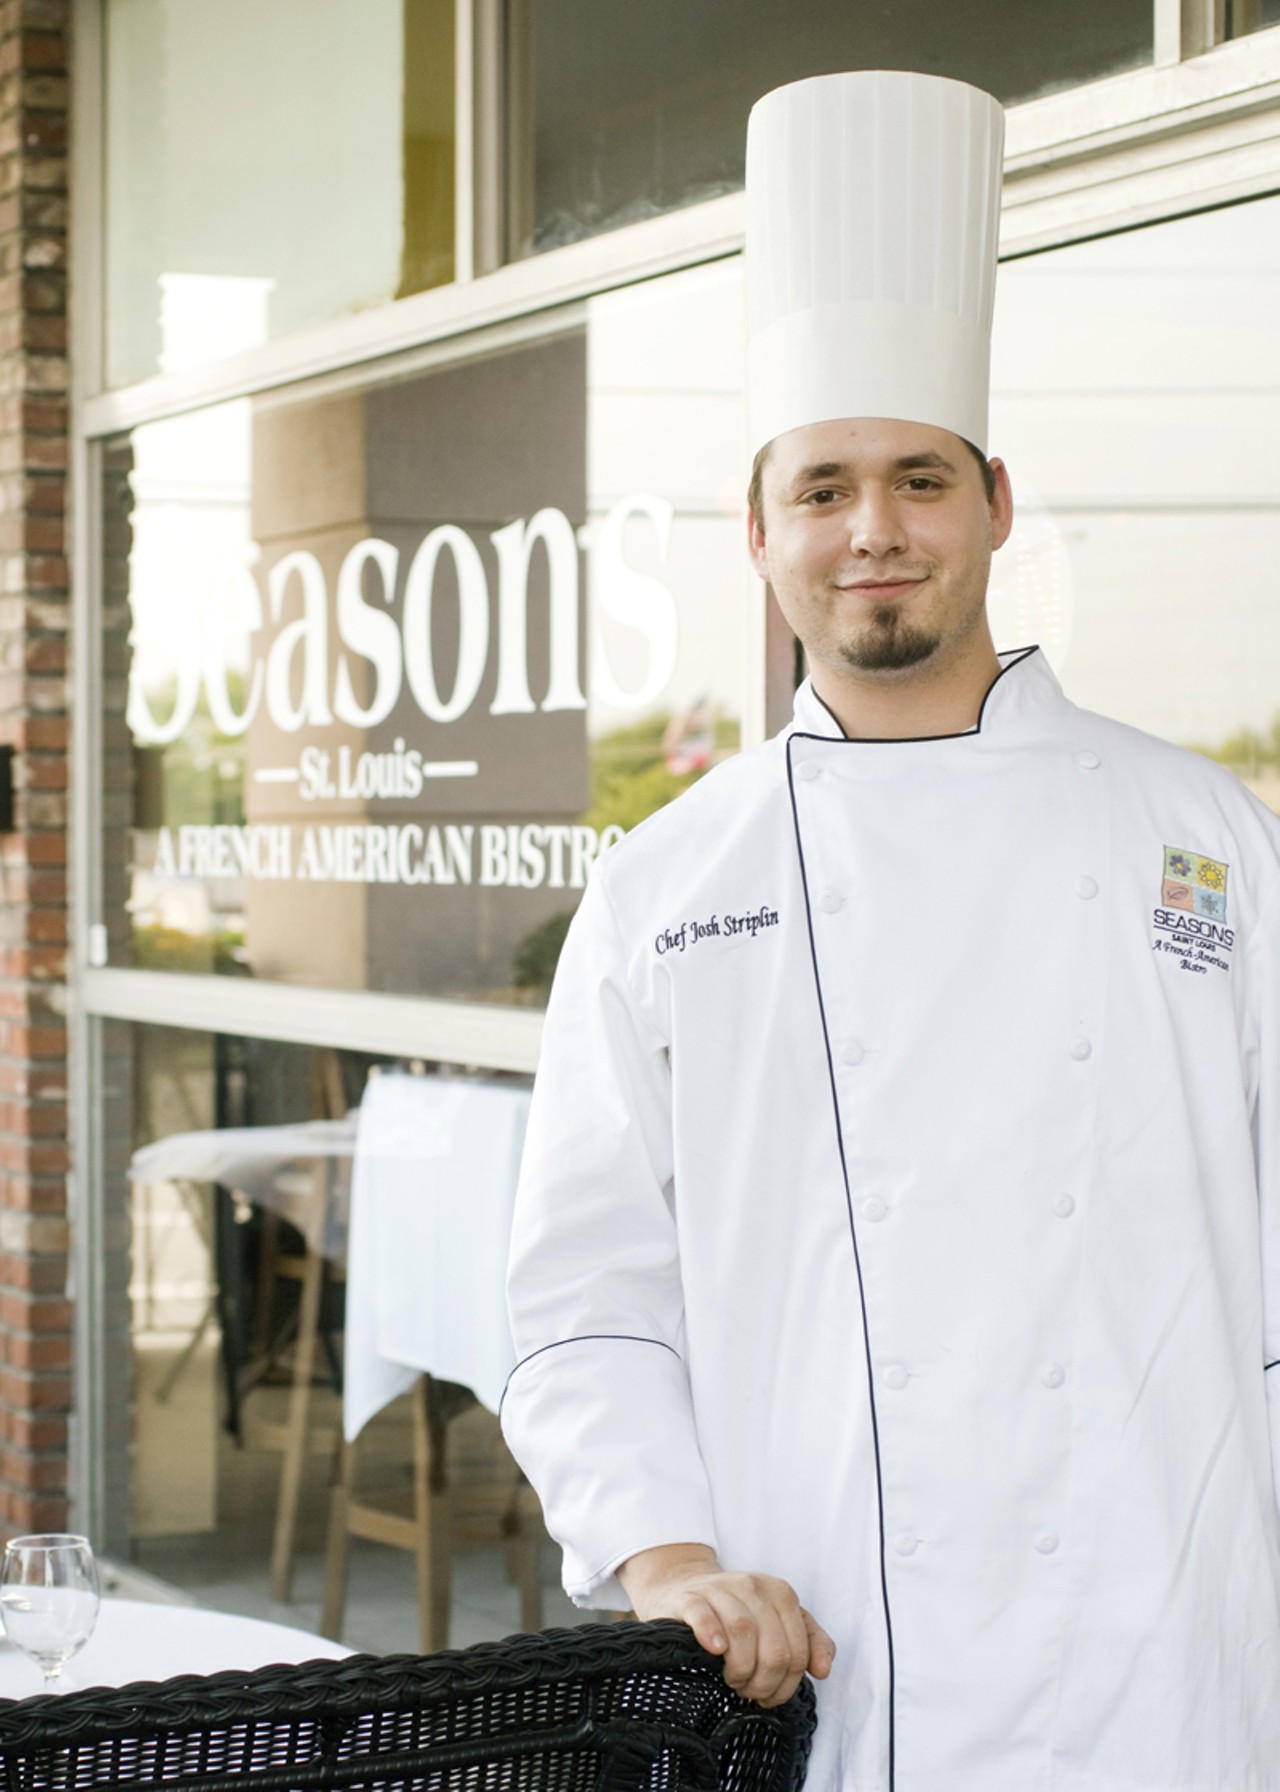 Co-Chef Josh Striplin of Seasons St. Louis allowed himself to be &ldquo;stolen&rdquo; away from the Fox in order to come work with friend/co-worker Benjamin and his family.